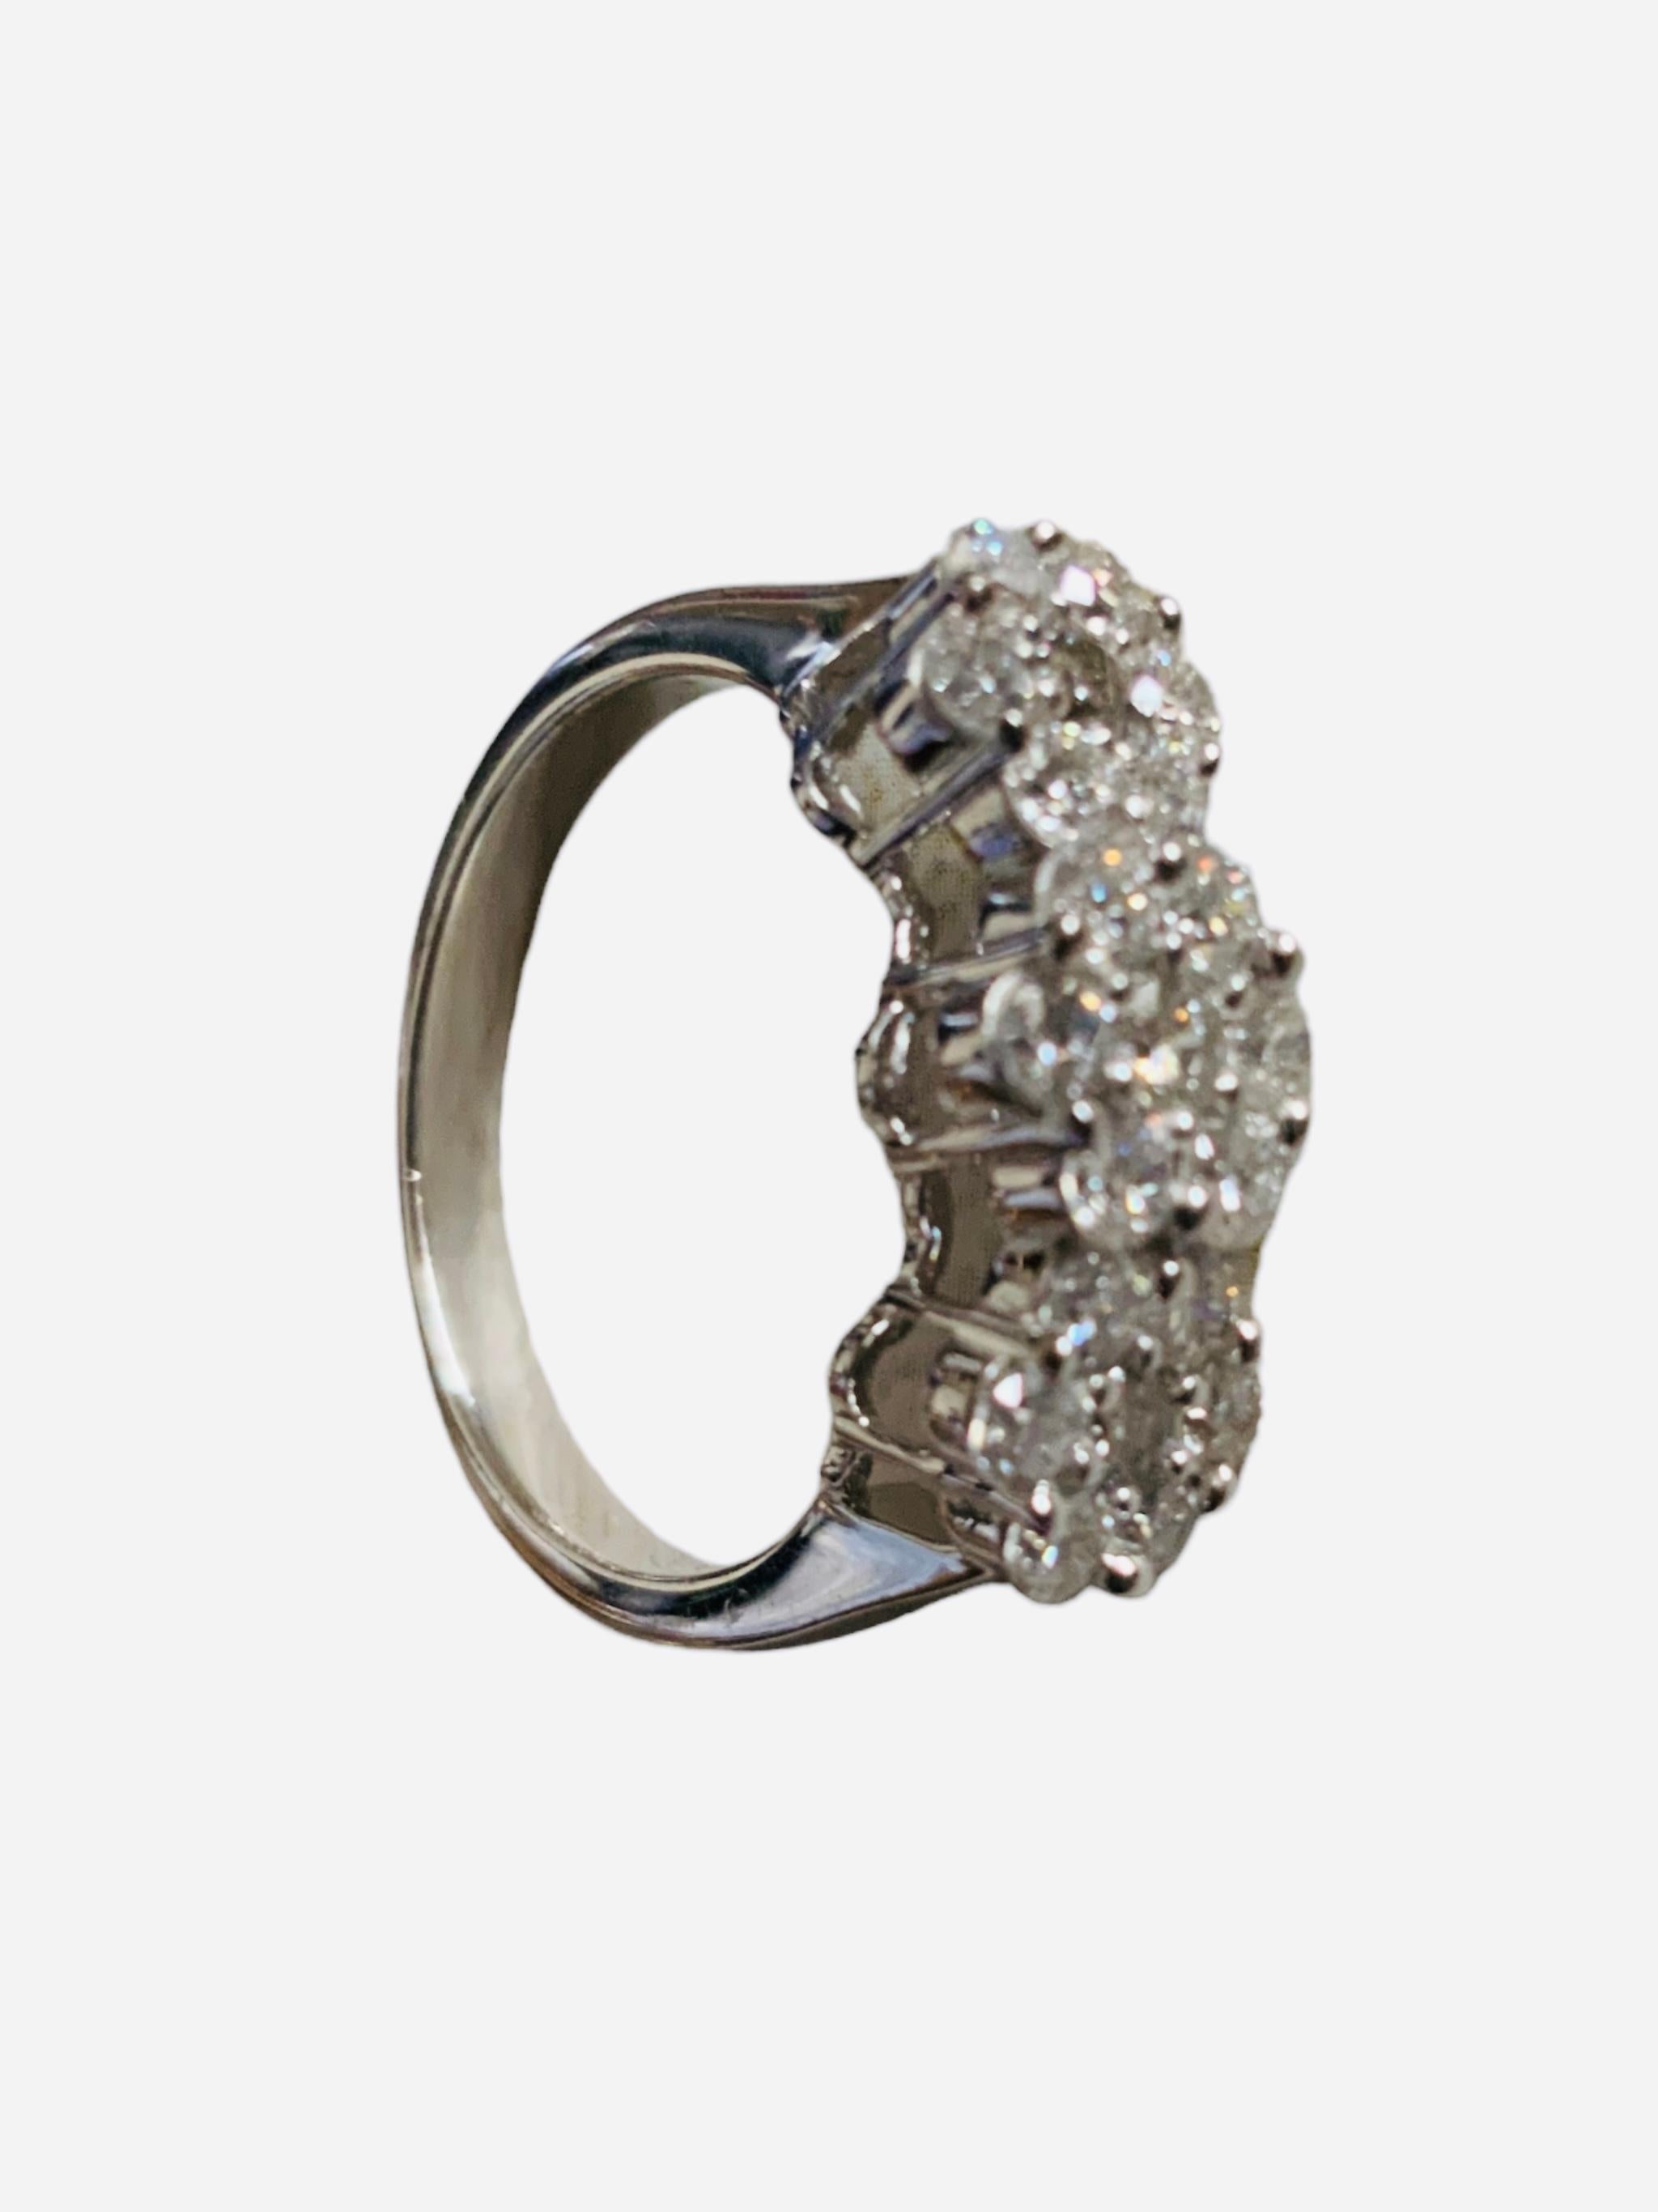 This is a one Lady’s triple cluster designs brilliant shaped diamonds ring. The triple cluster forms three flowers in a row that contains 21 brilliant shape diamonds ( Color- G-H; Clarity- VS to SI; Kimberly diamonds ) in prong setting weighing 1.05